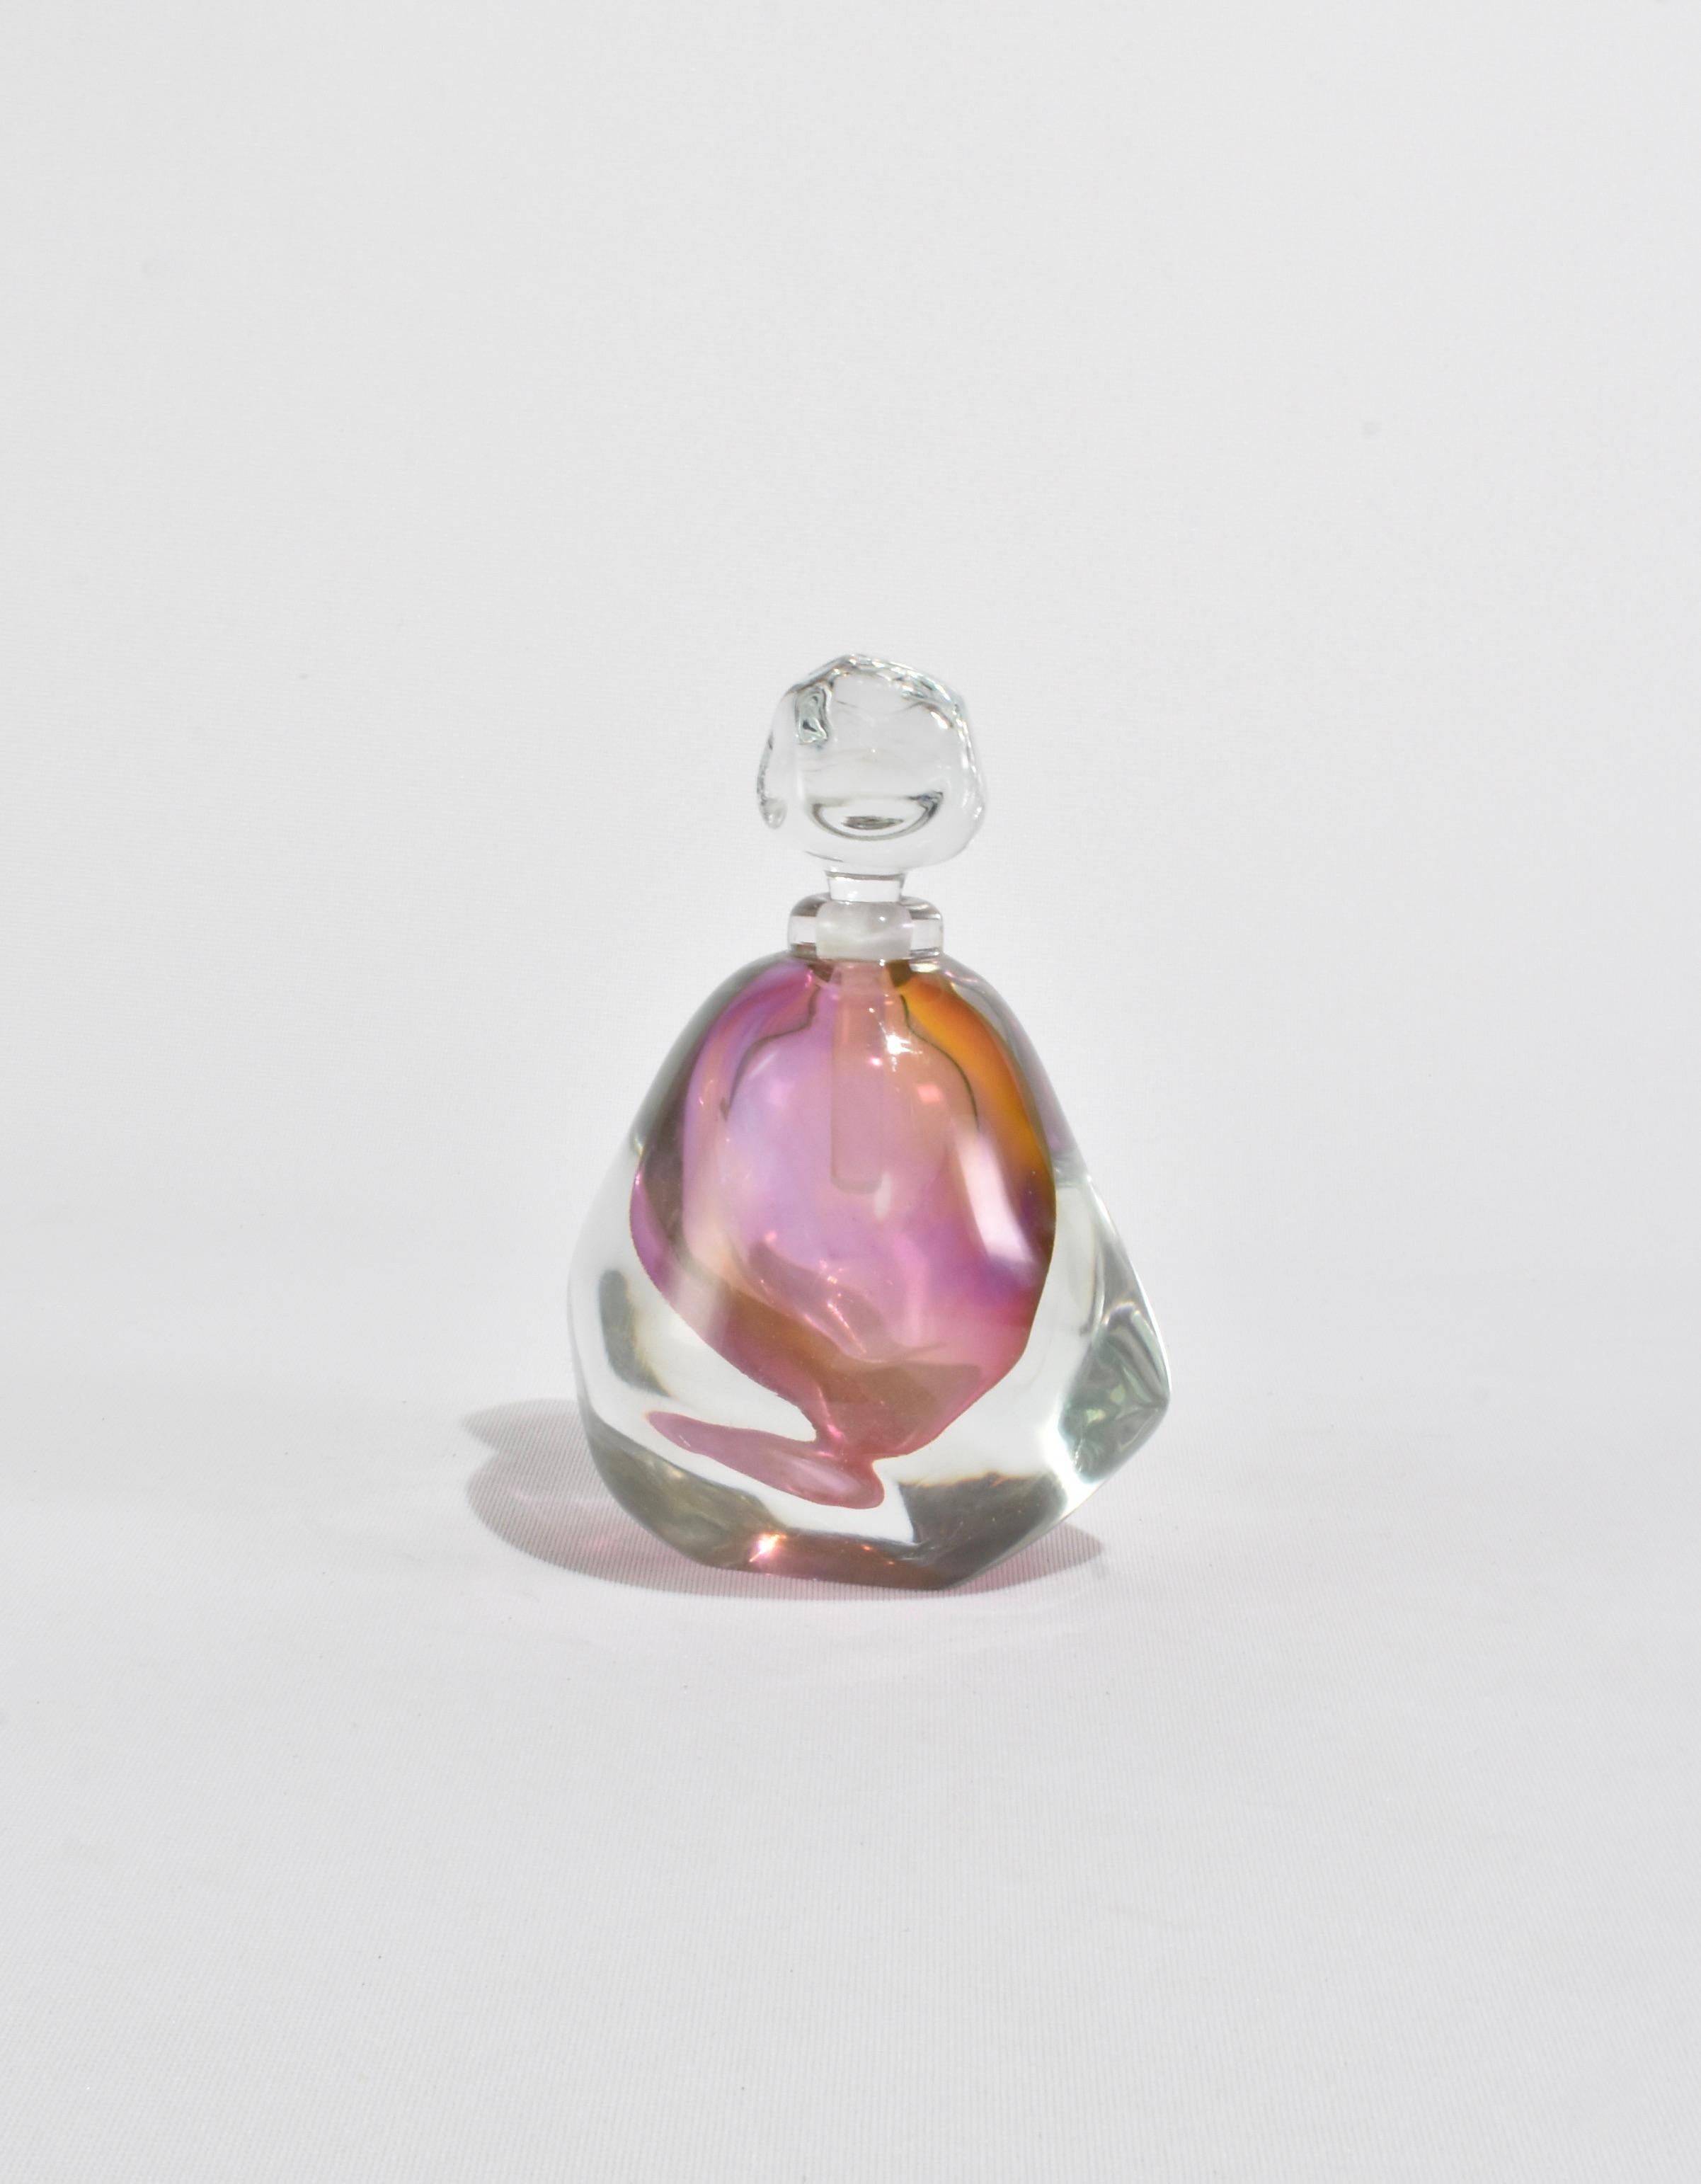 Hand-Crafted Colorful Perfume Bottle For Sale